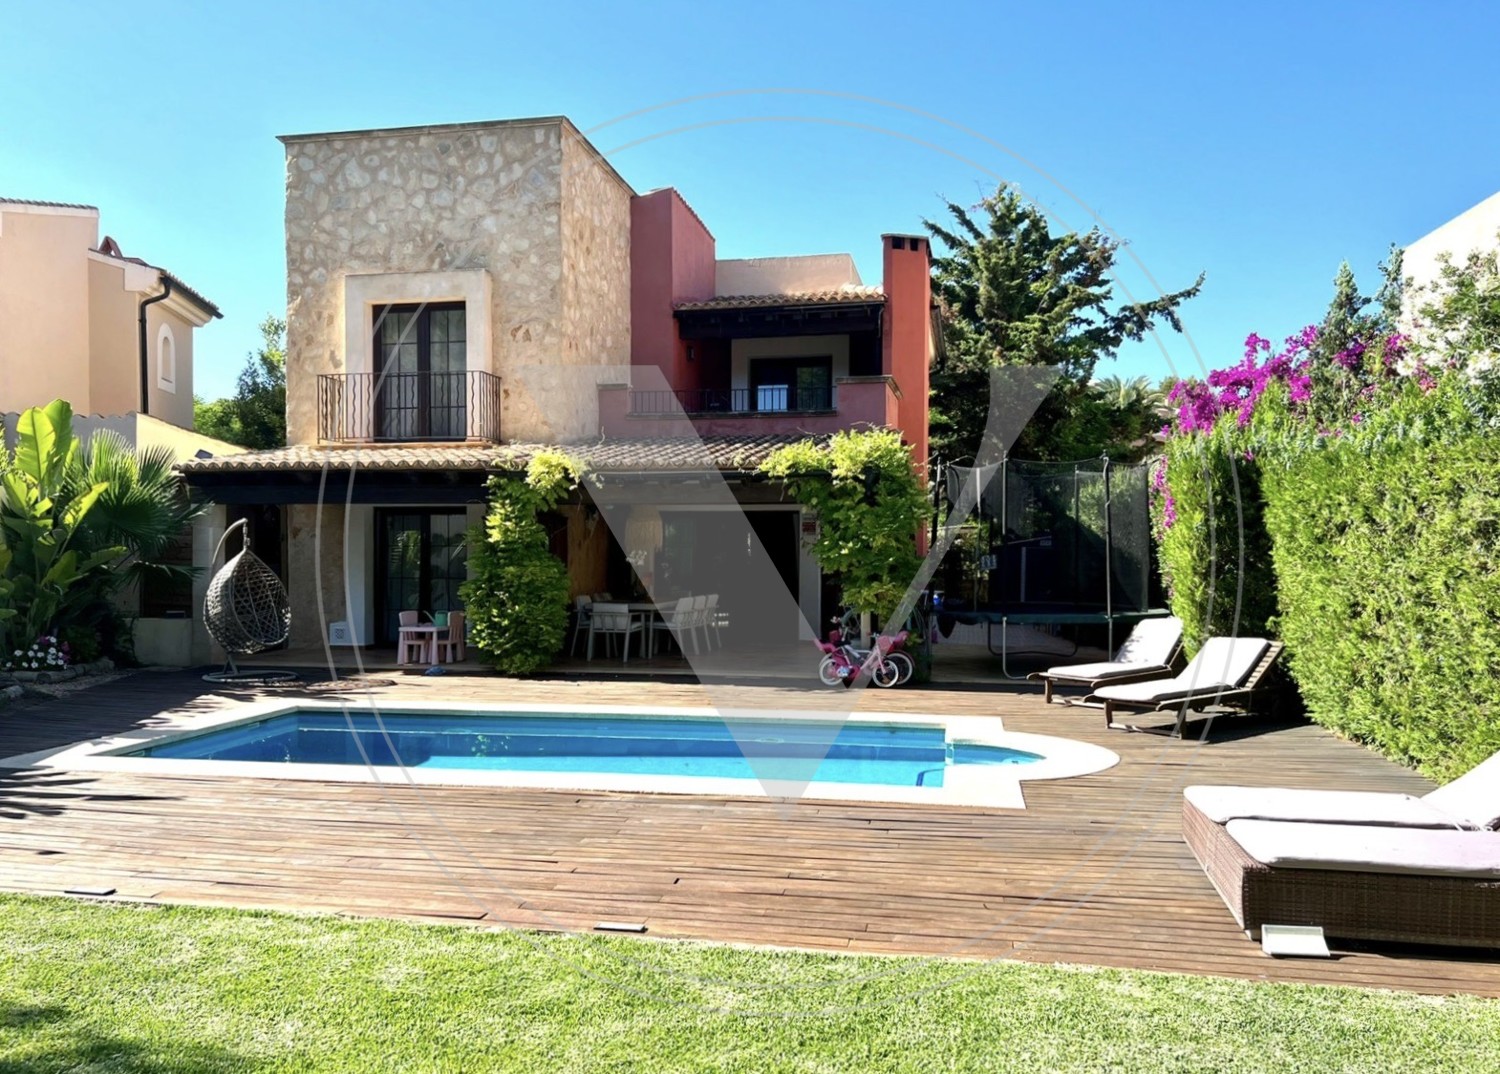 Exclusive detached house in Ses Penyes Rotges, close to golf courses and Port Adriano